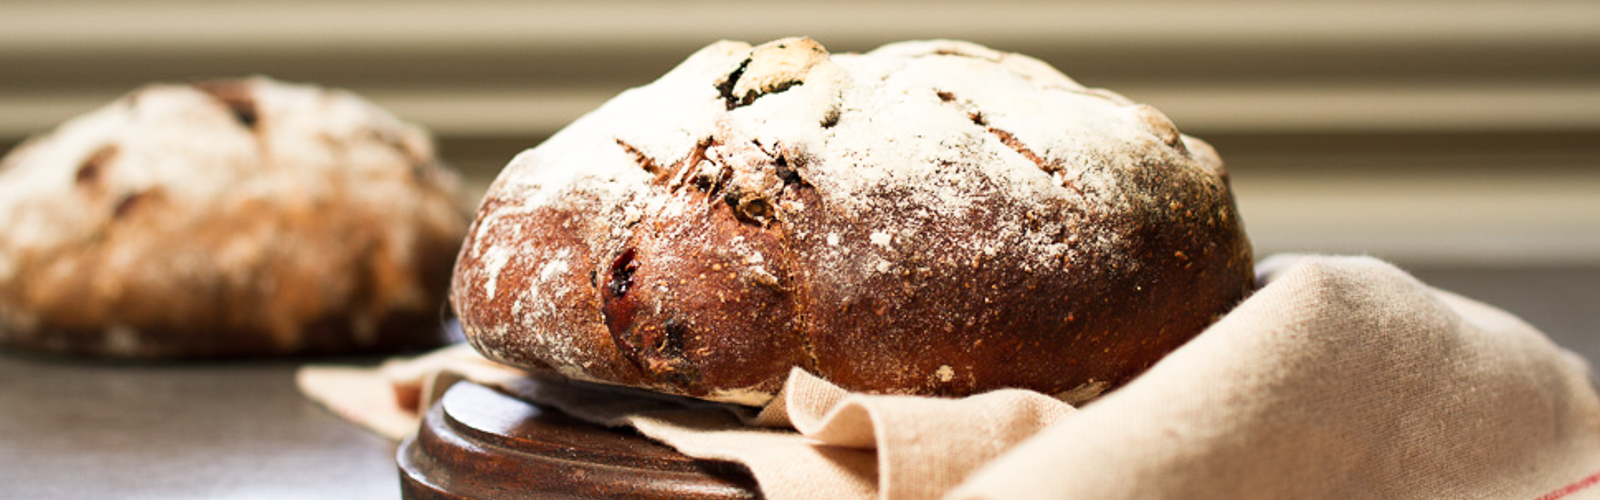 Tangy sour cherries and chocolate lend decadence to this bread while prunes provide sweetness. Serve this bread with chèvre, Gruyère, and pecorino.